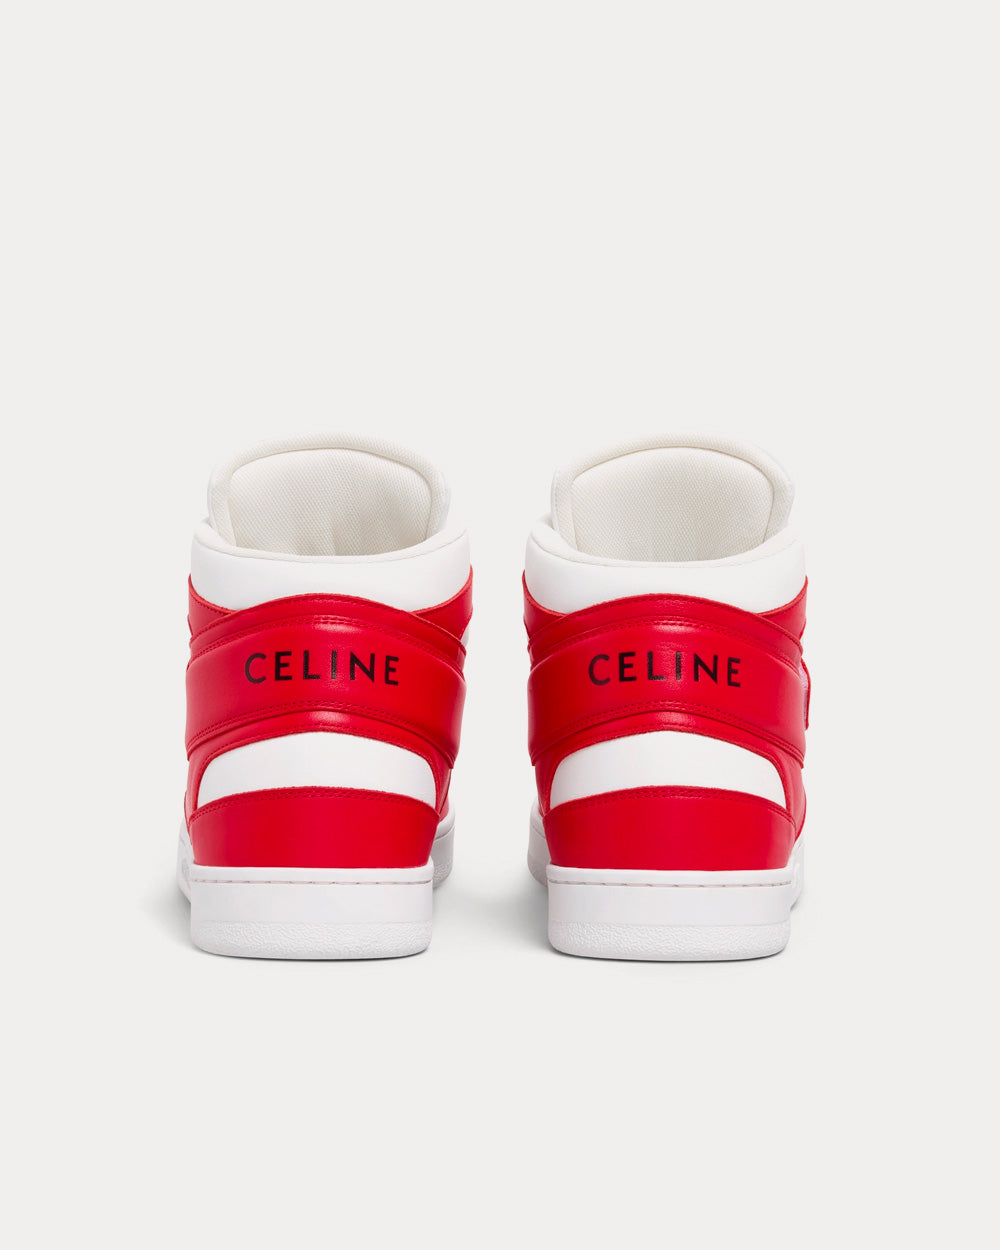 Celine - CT-03 Scratch with Calfskin Red / Optic White High Top Sneakers